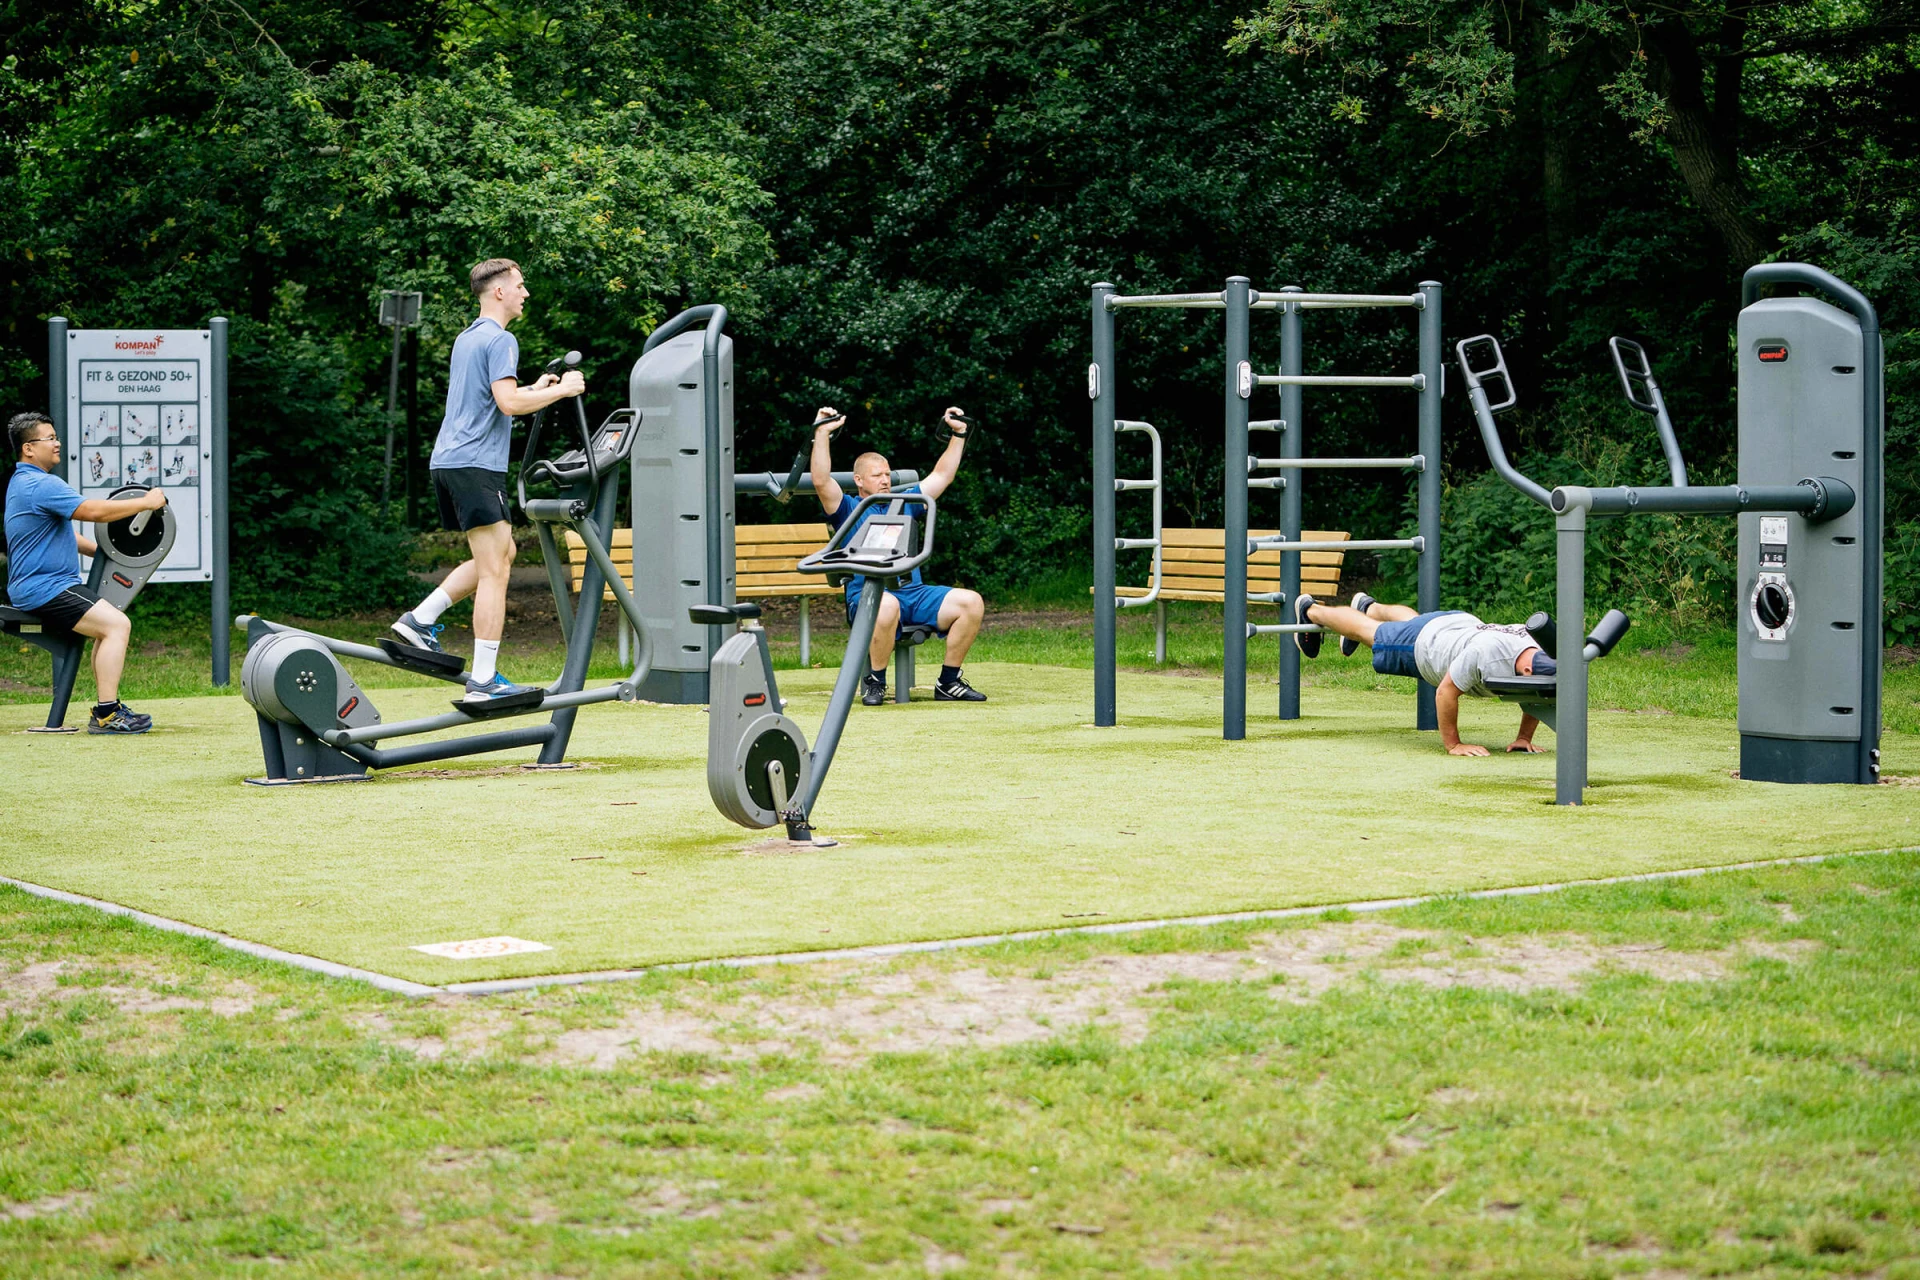 People working out at an outdoor fitness area, using outdoor strength and cardio machines